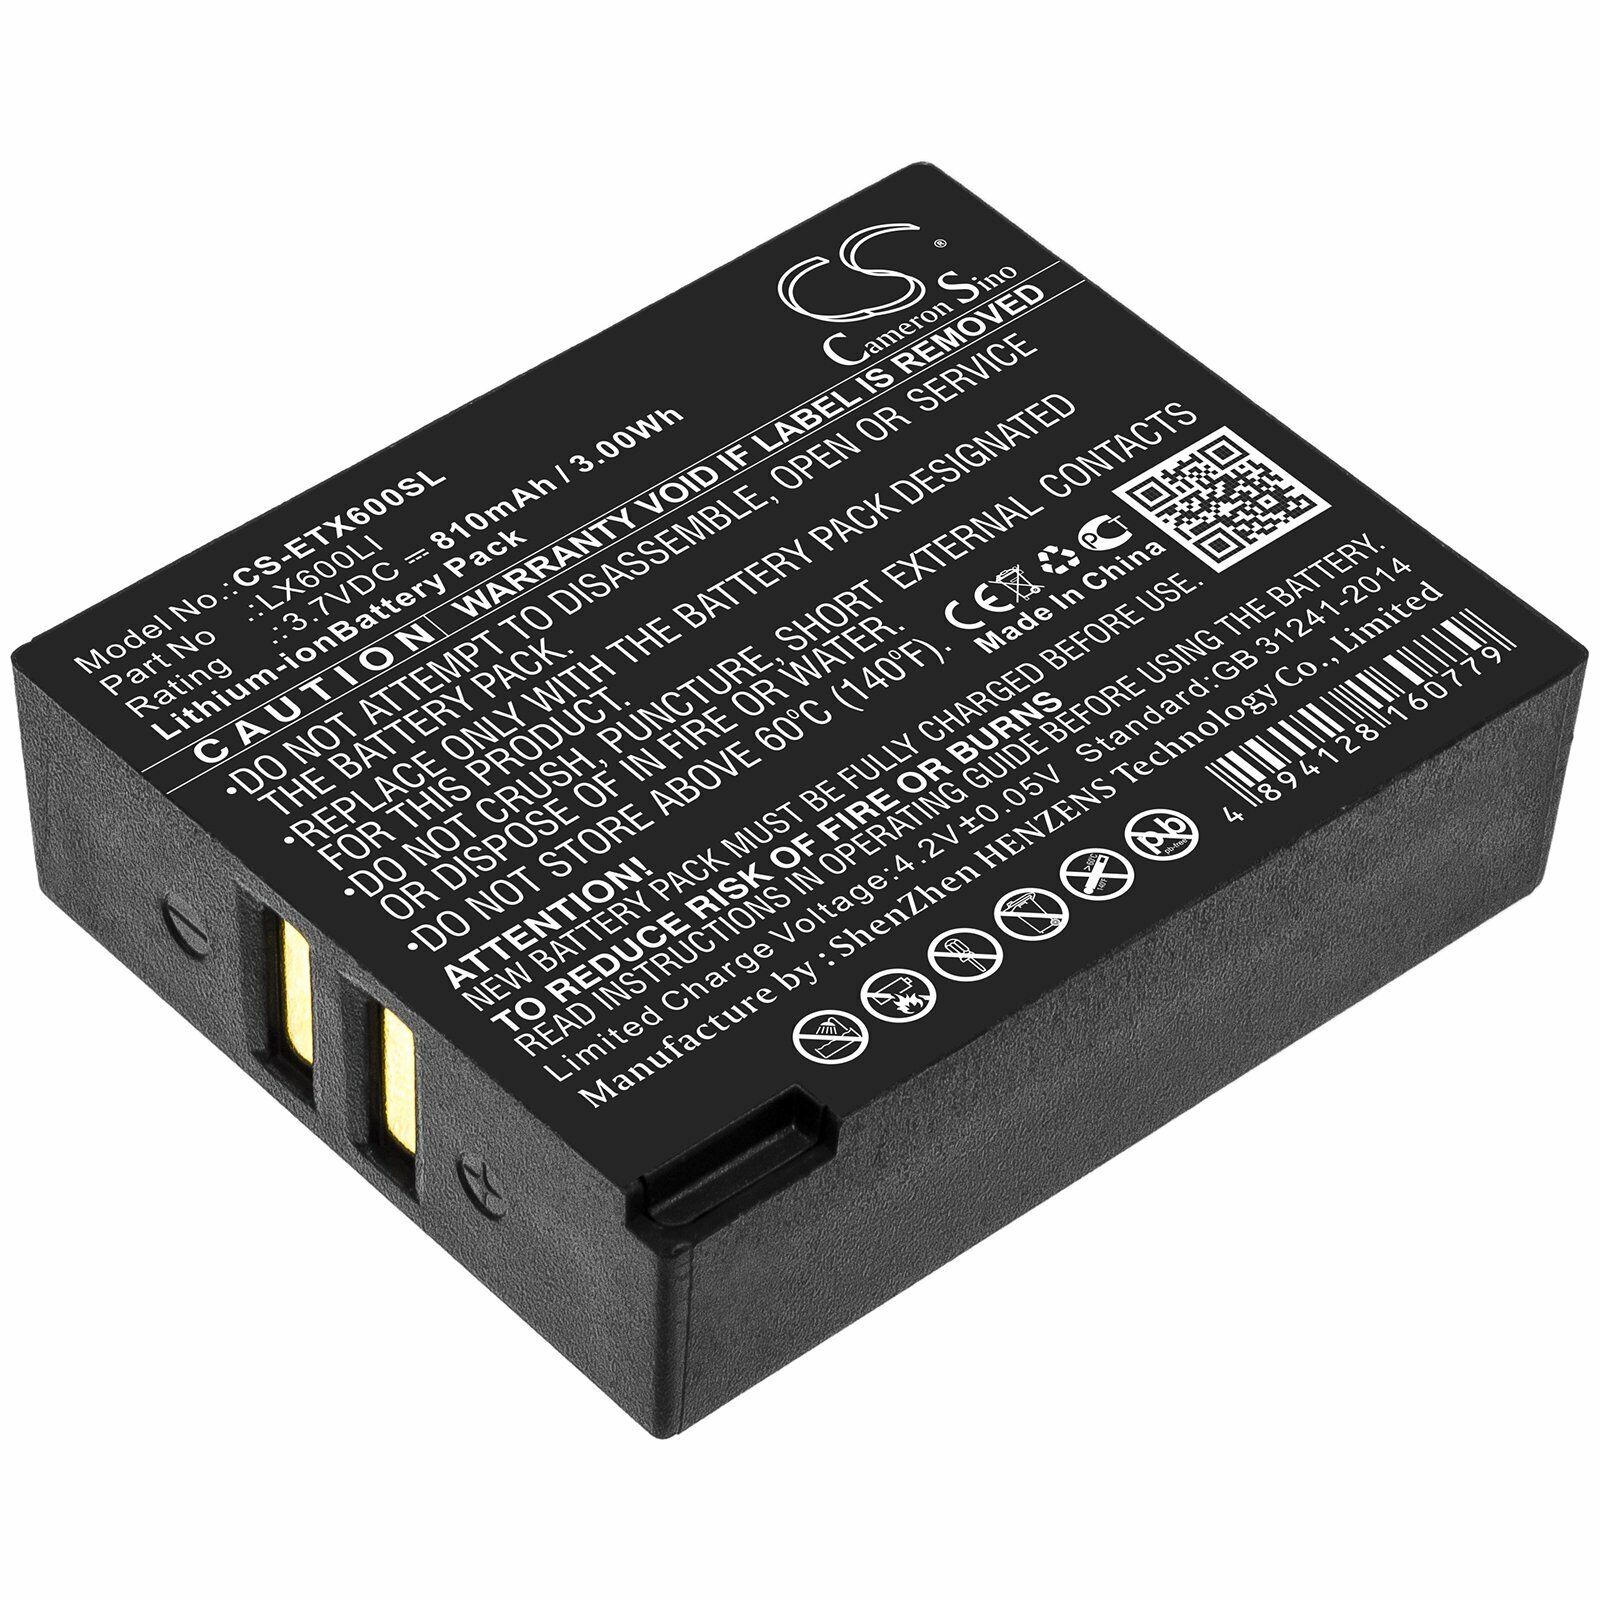 LX600LI Battery for Eartec UltraLite Hub Systems, 810mAh - sold by smavco